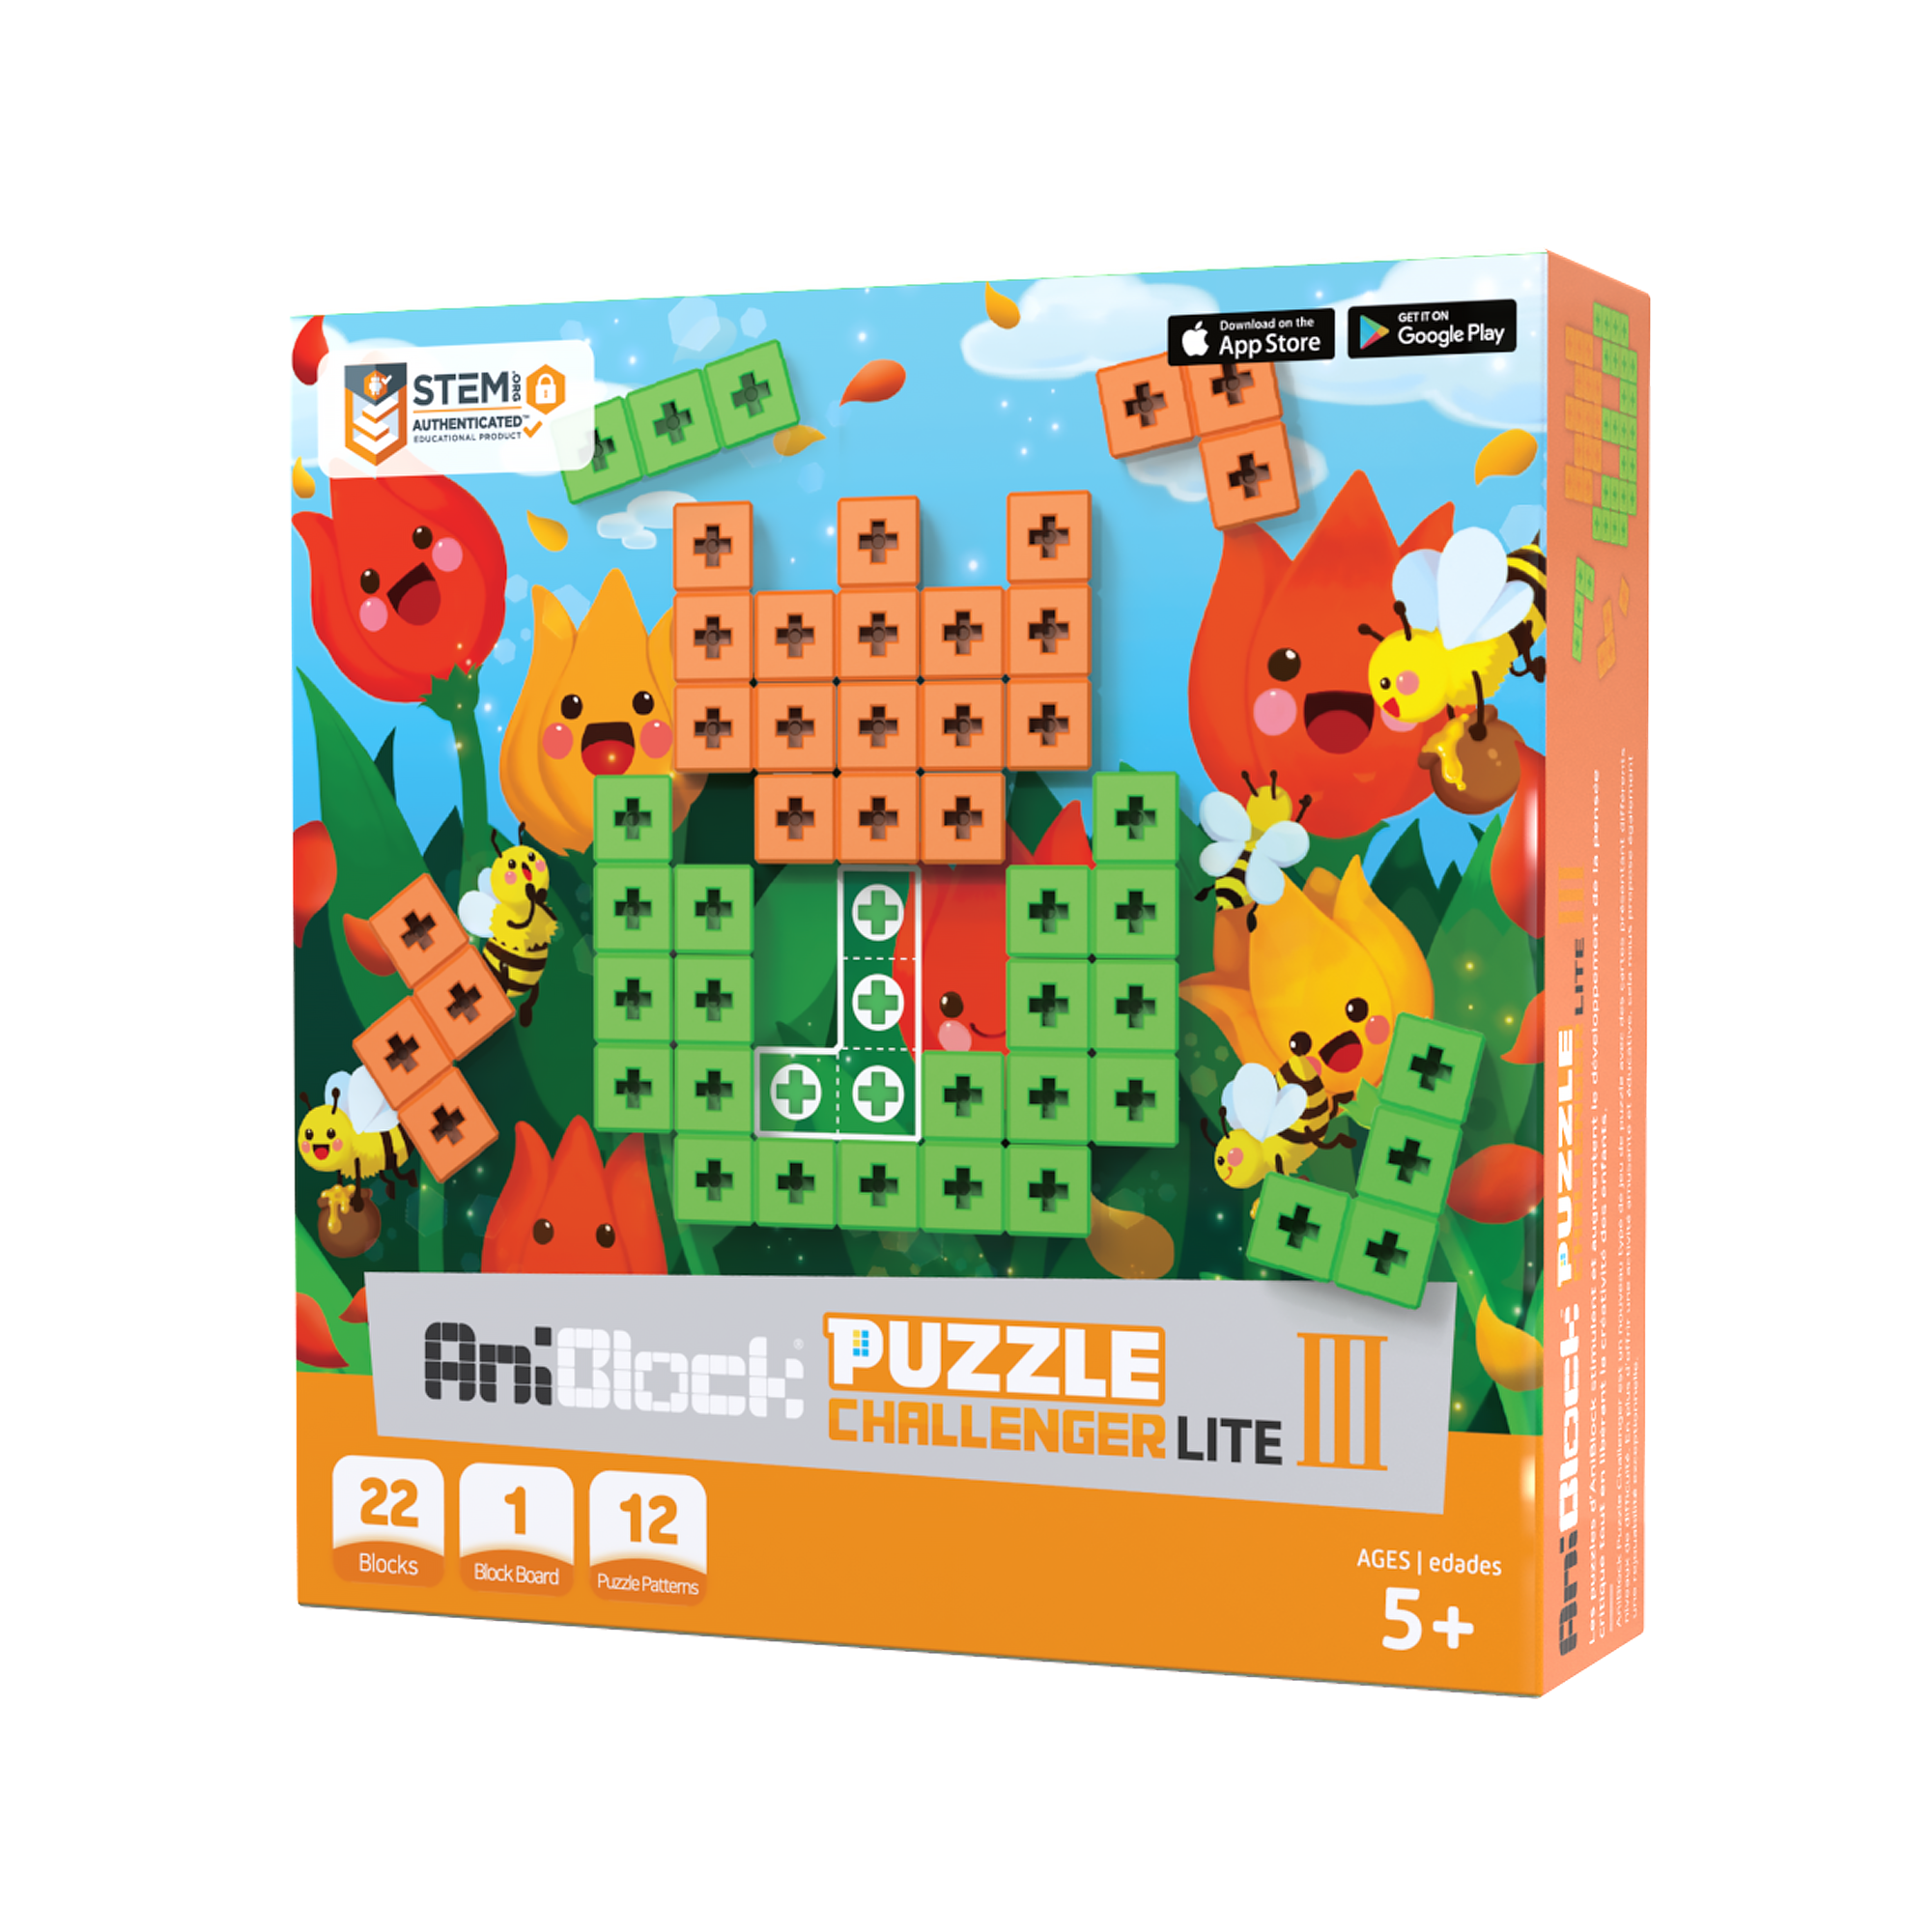 AniBlock Puzzle Challenger For Everyone - Orange and Green